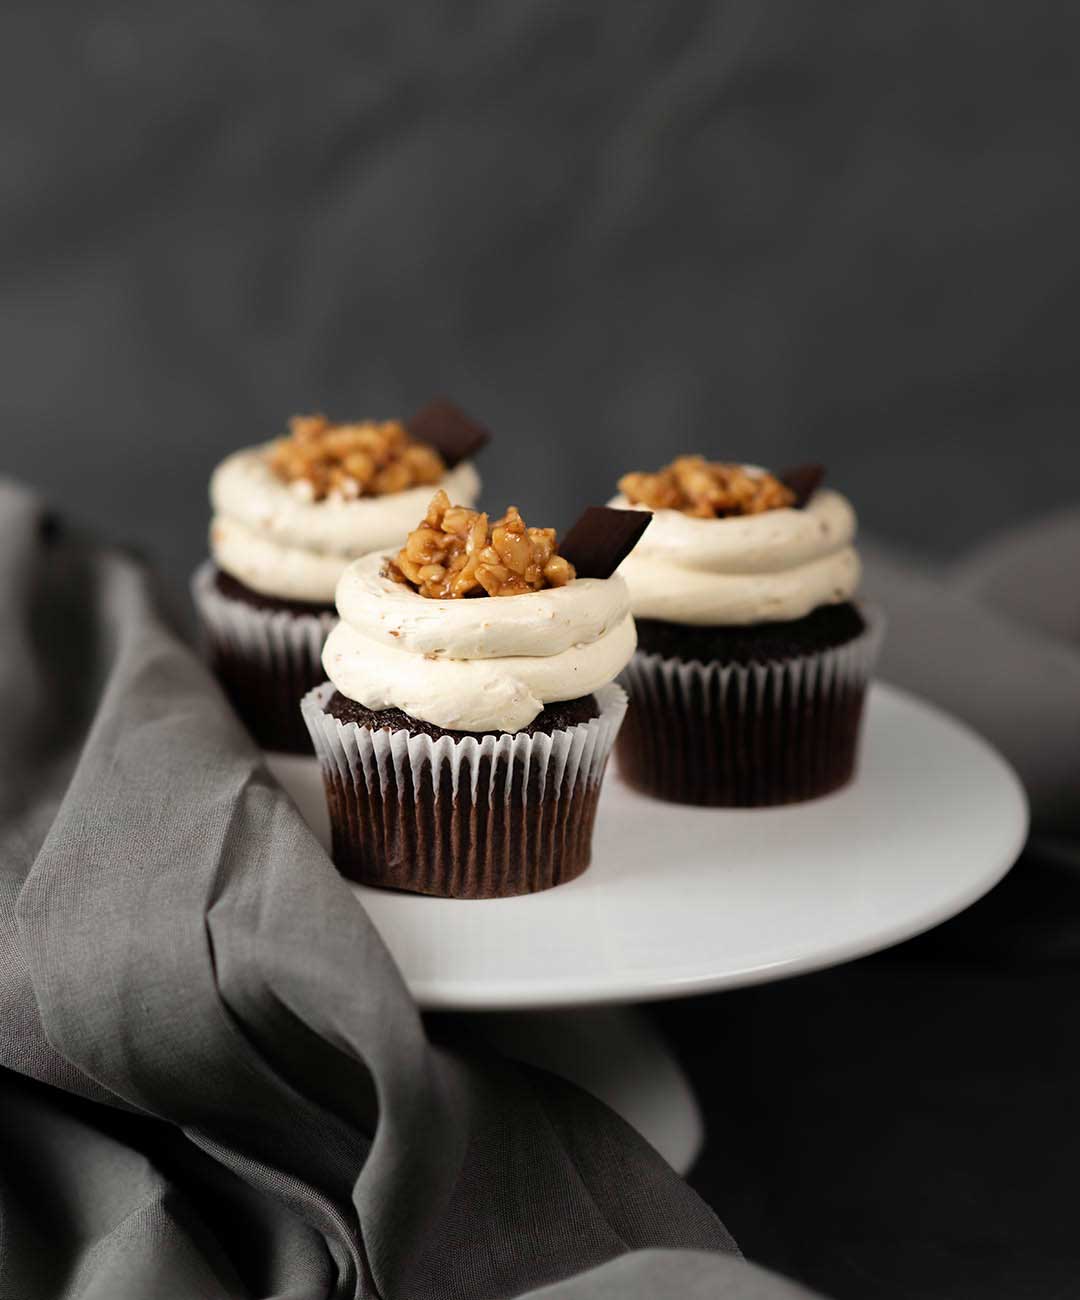 Snickers Chocolate Cupcakes